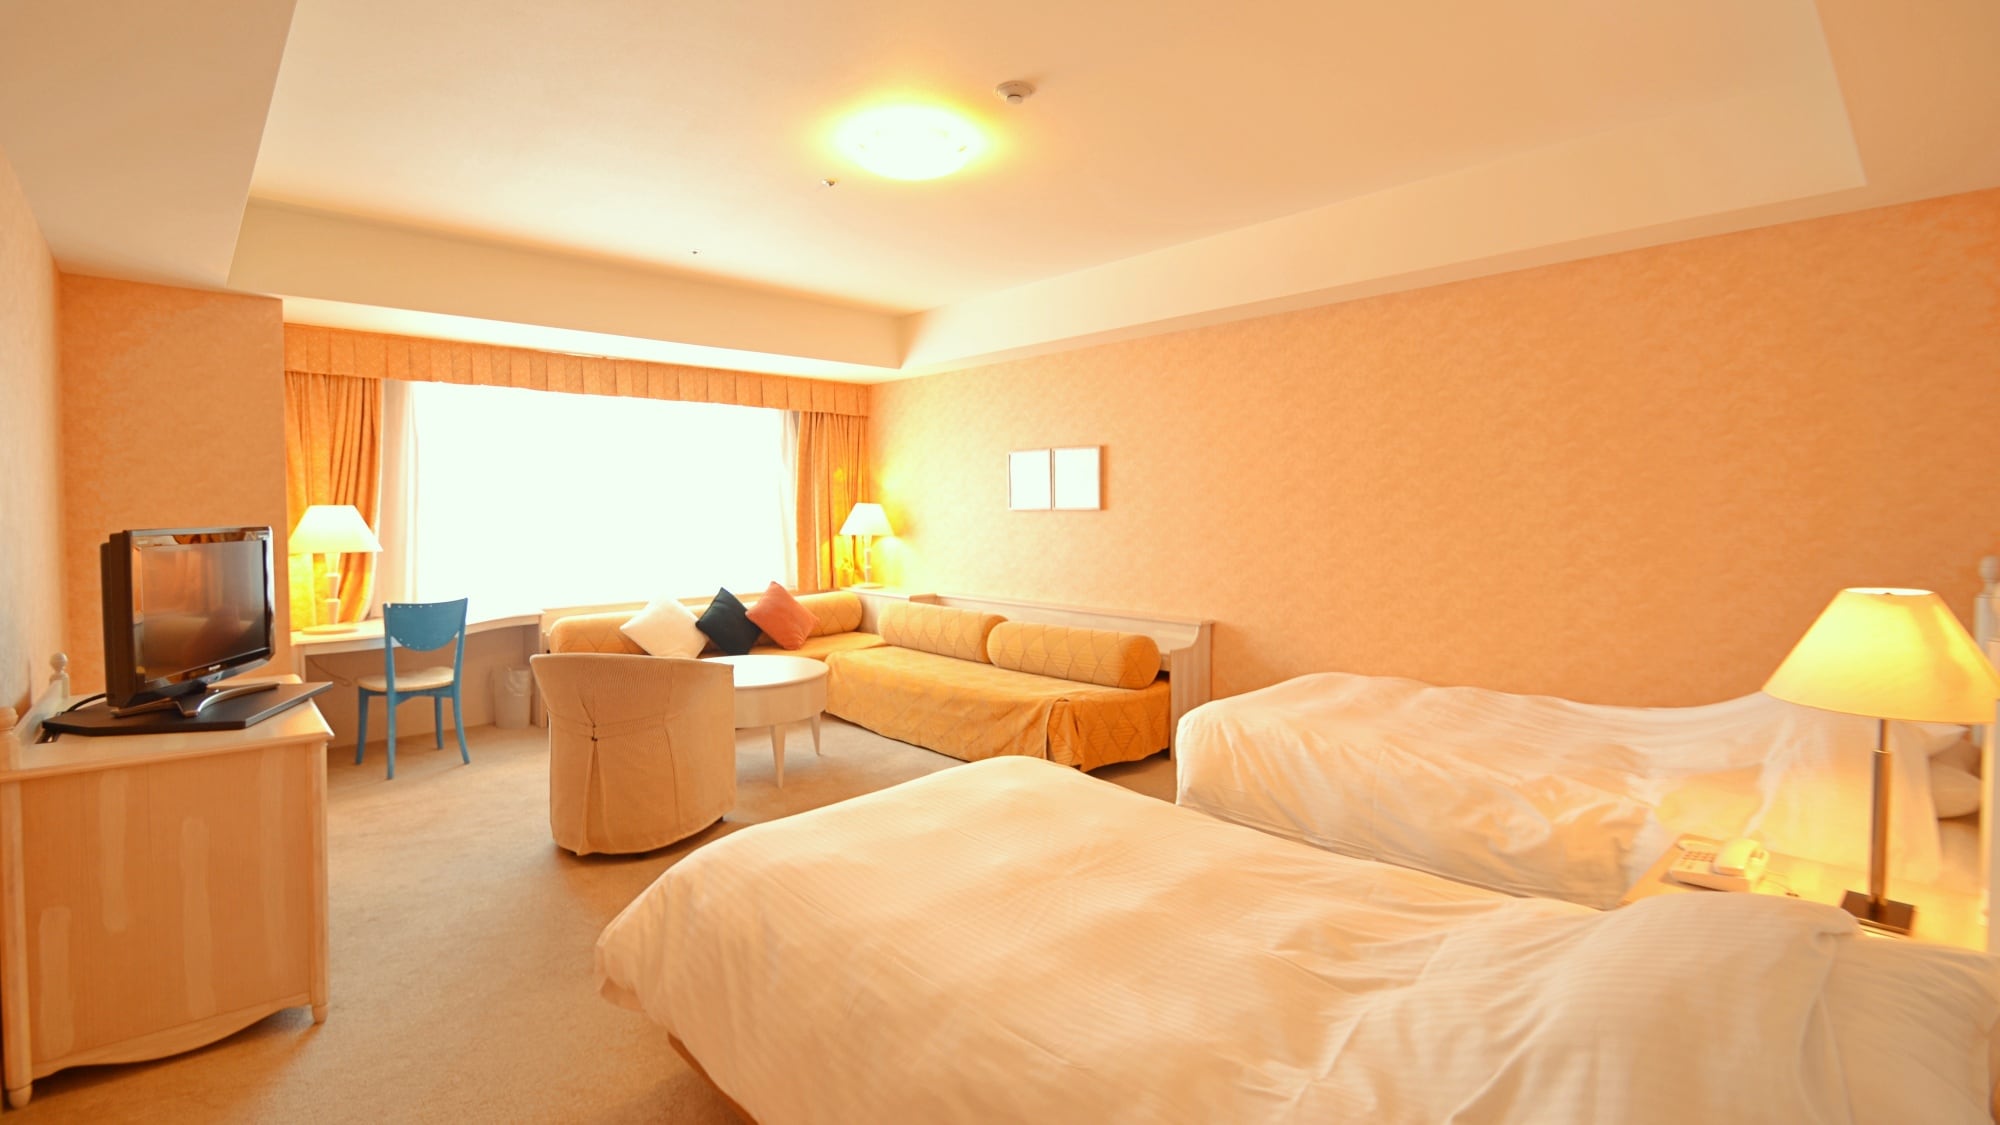 Royal twin room that can accommodate up to 4 people. We will prepare 4 single size beds.